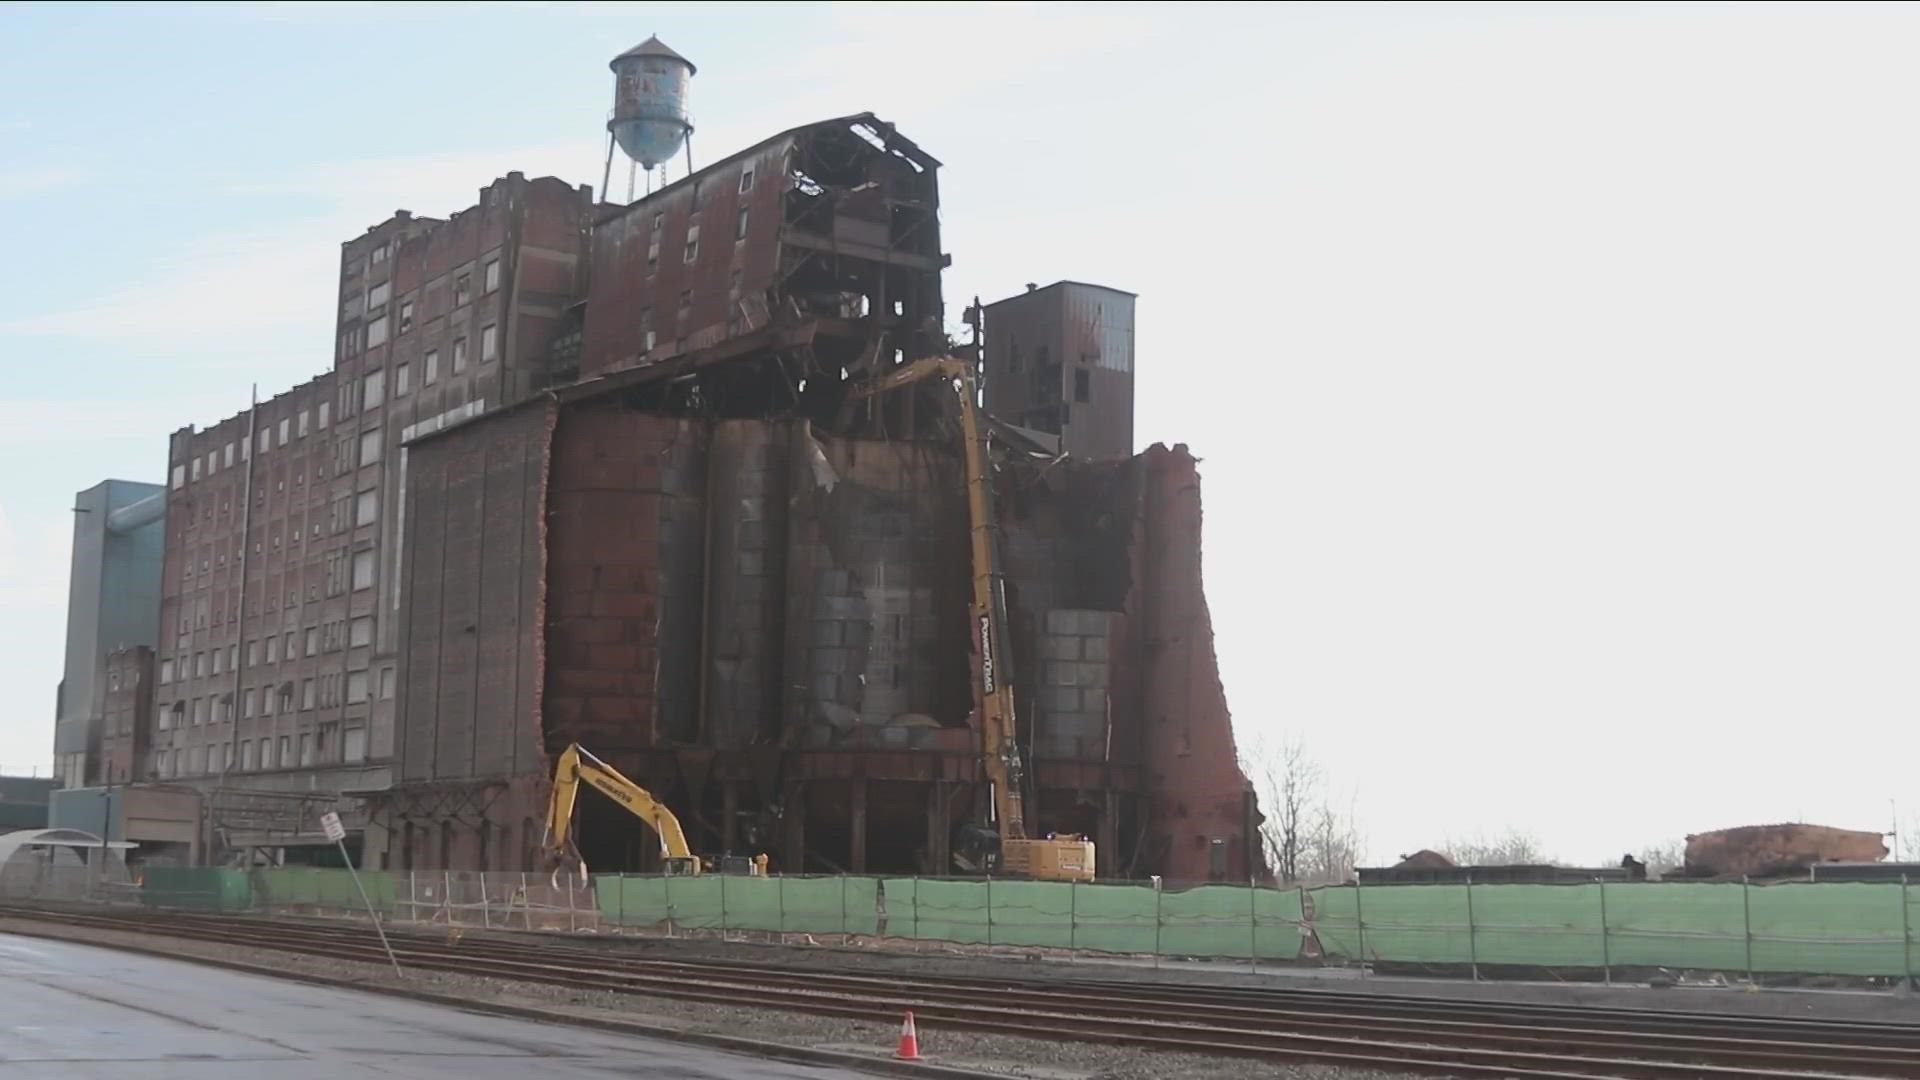 Preservationists have stopped their appeal process to halt the demolition of the Great Northern Elevator. Demolition of 126-year-old grain elevator will continue.